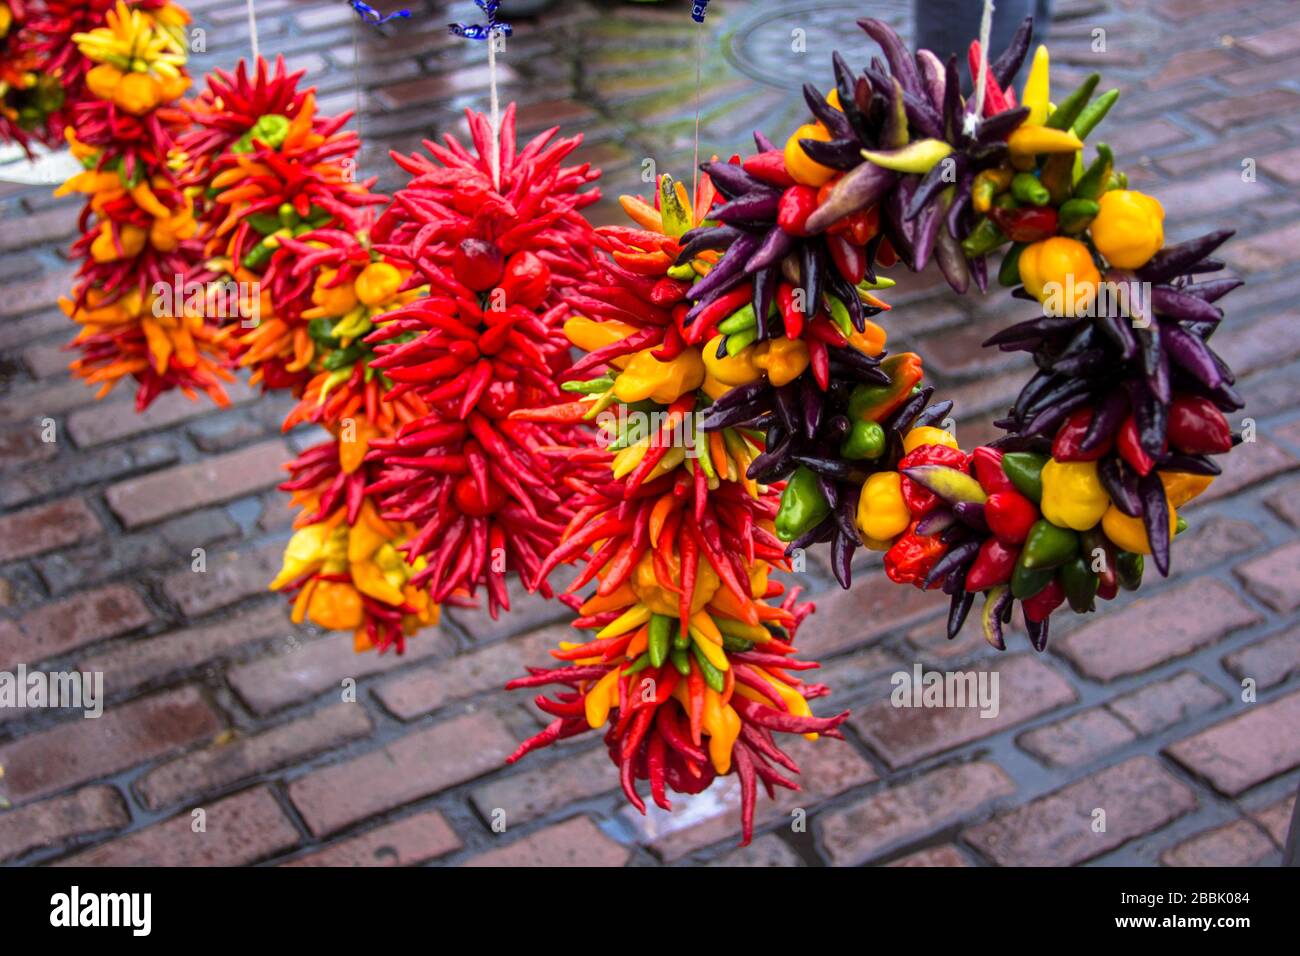 Wreaths of peppers for sale at a vendor booth at a farmer's market Stock Photo